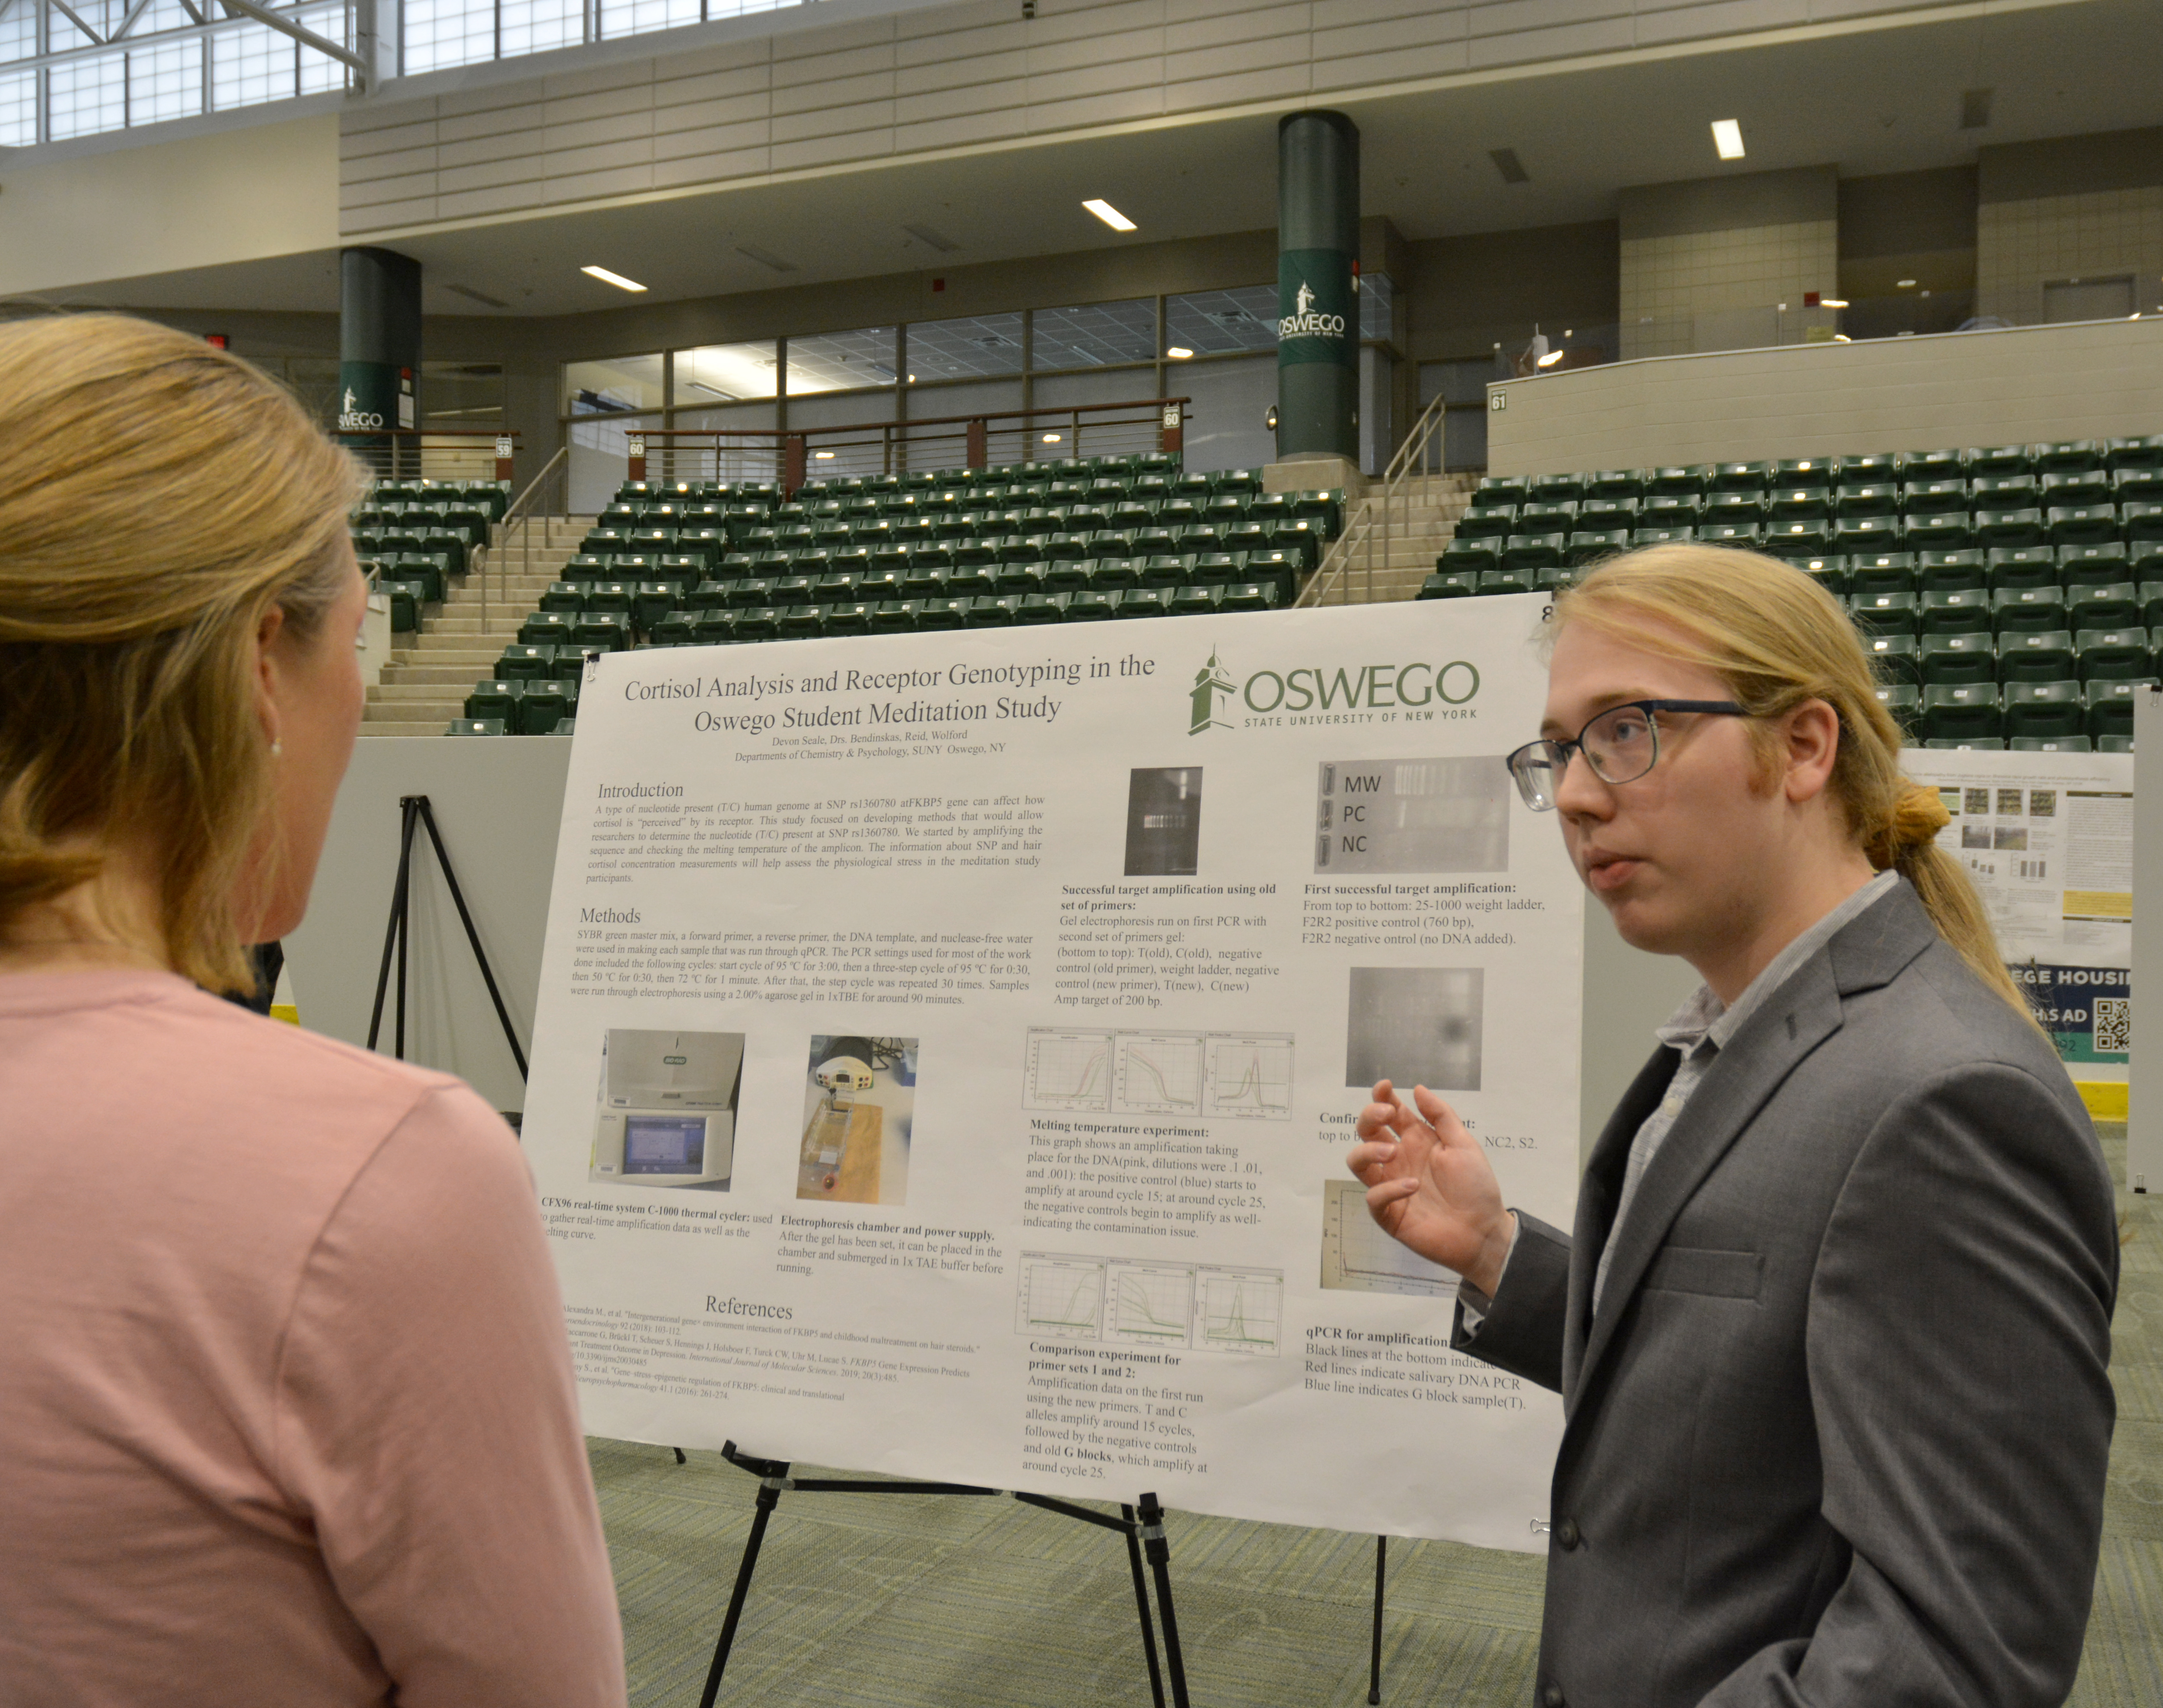 At Quest, biochemistry major Devon Seale presents a poster titled “Cortisol Analysis and Receptor Genotyping in the Oswego Student Mediation Study," developed with faculty mentors Kestas Bendinskas of the chemistry faculty and psychology faculty members Karen Wolford and Staceyann Reid.